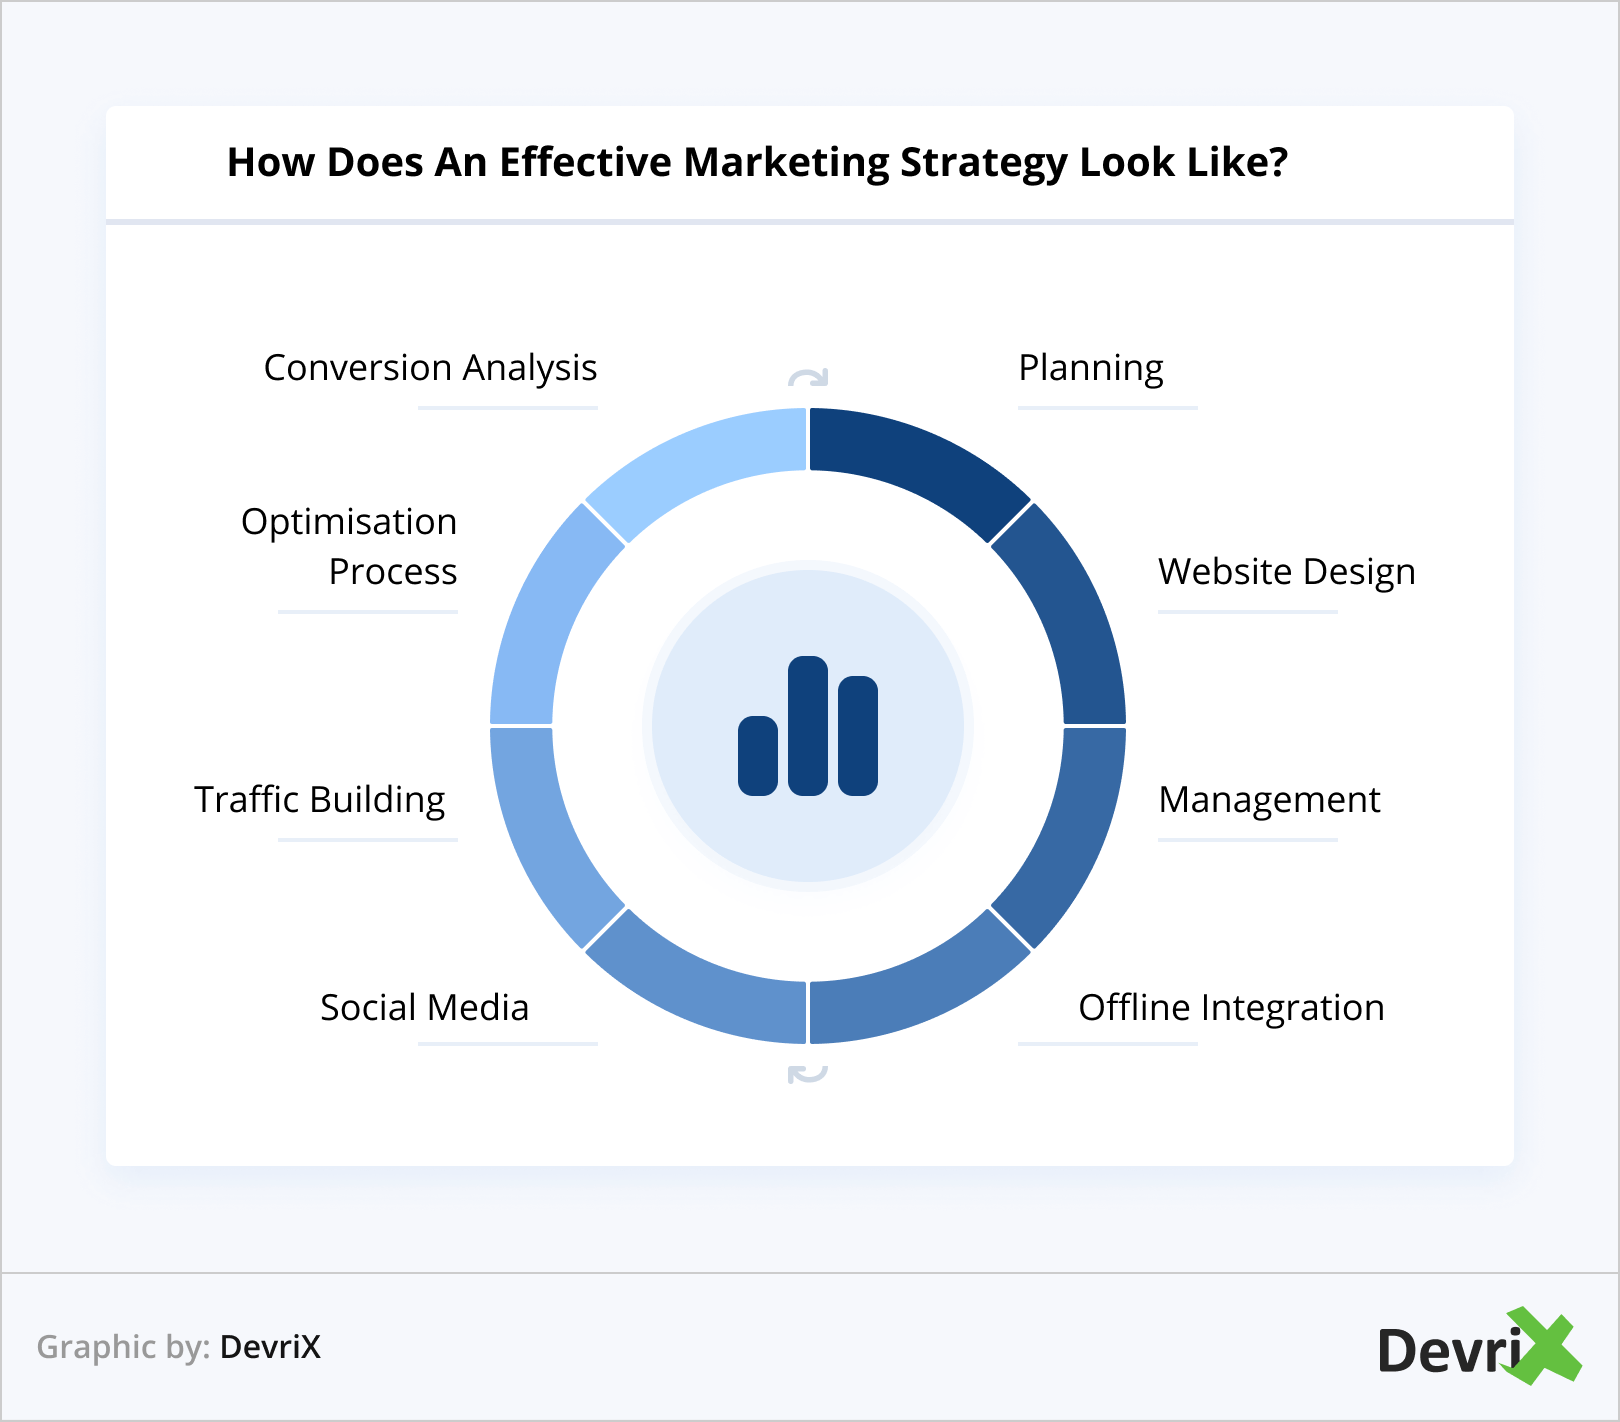 How Does An Effective Marketing Strategy Look Like